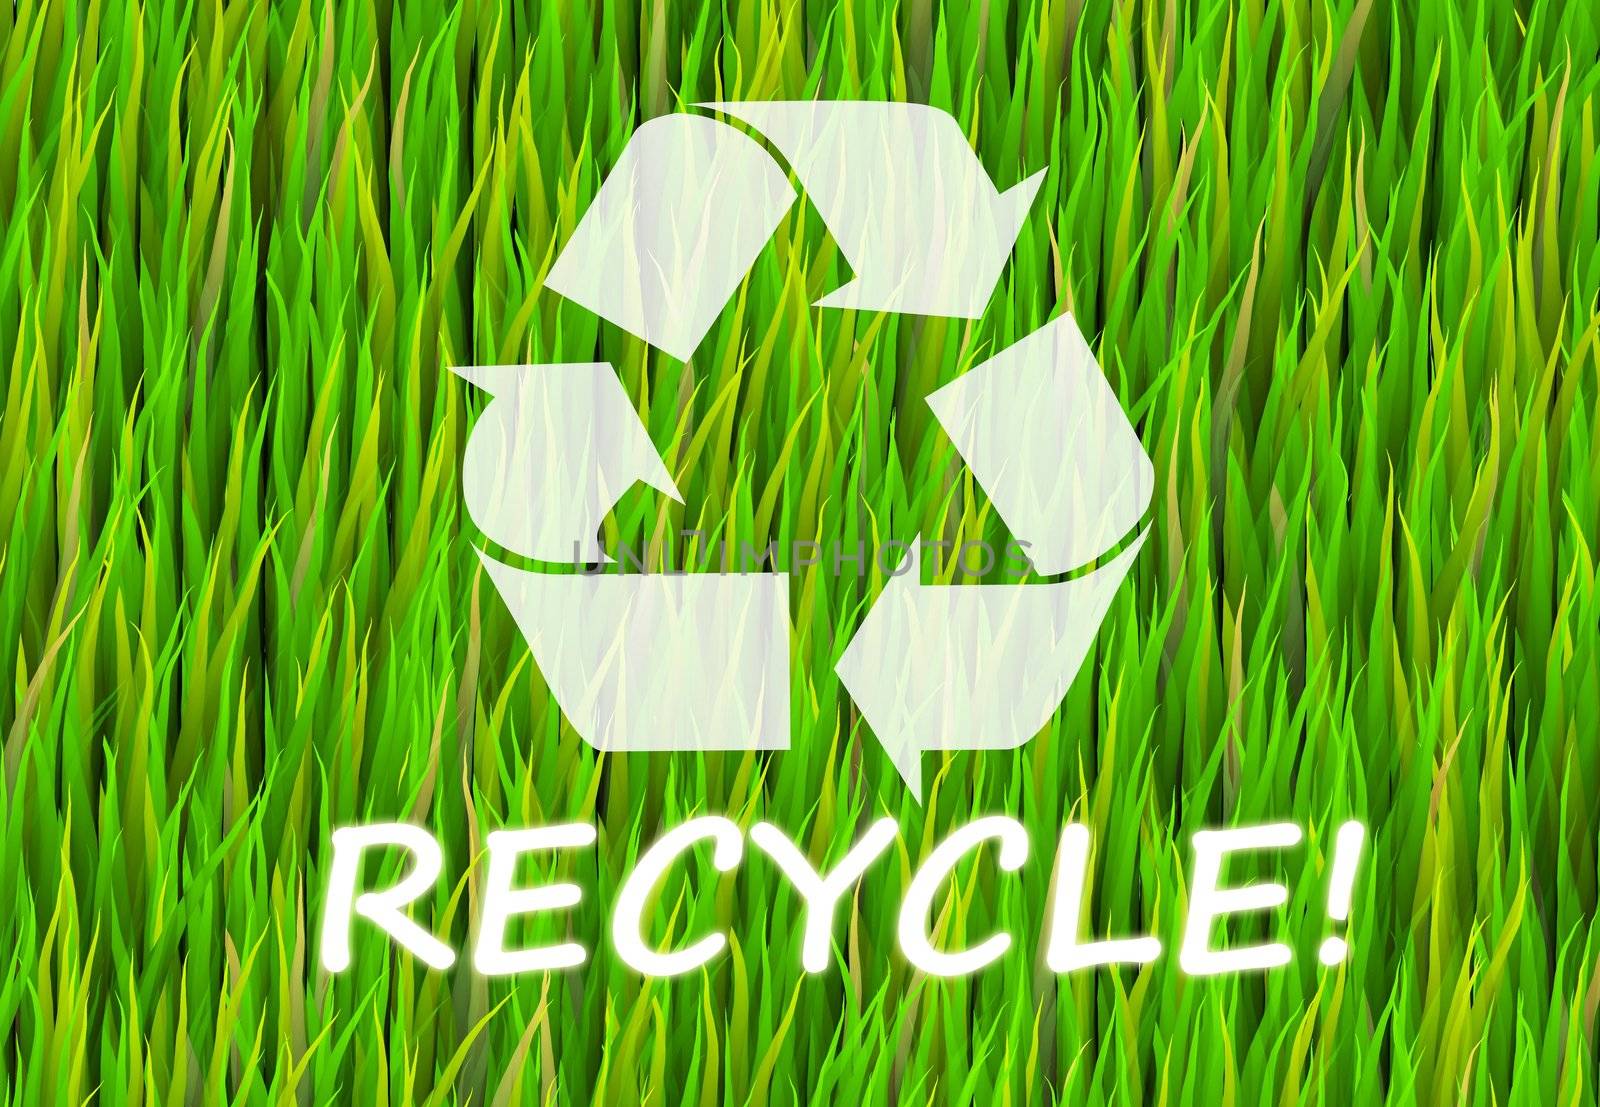 Recycle Now and Natural Now Abstract Background